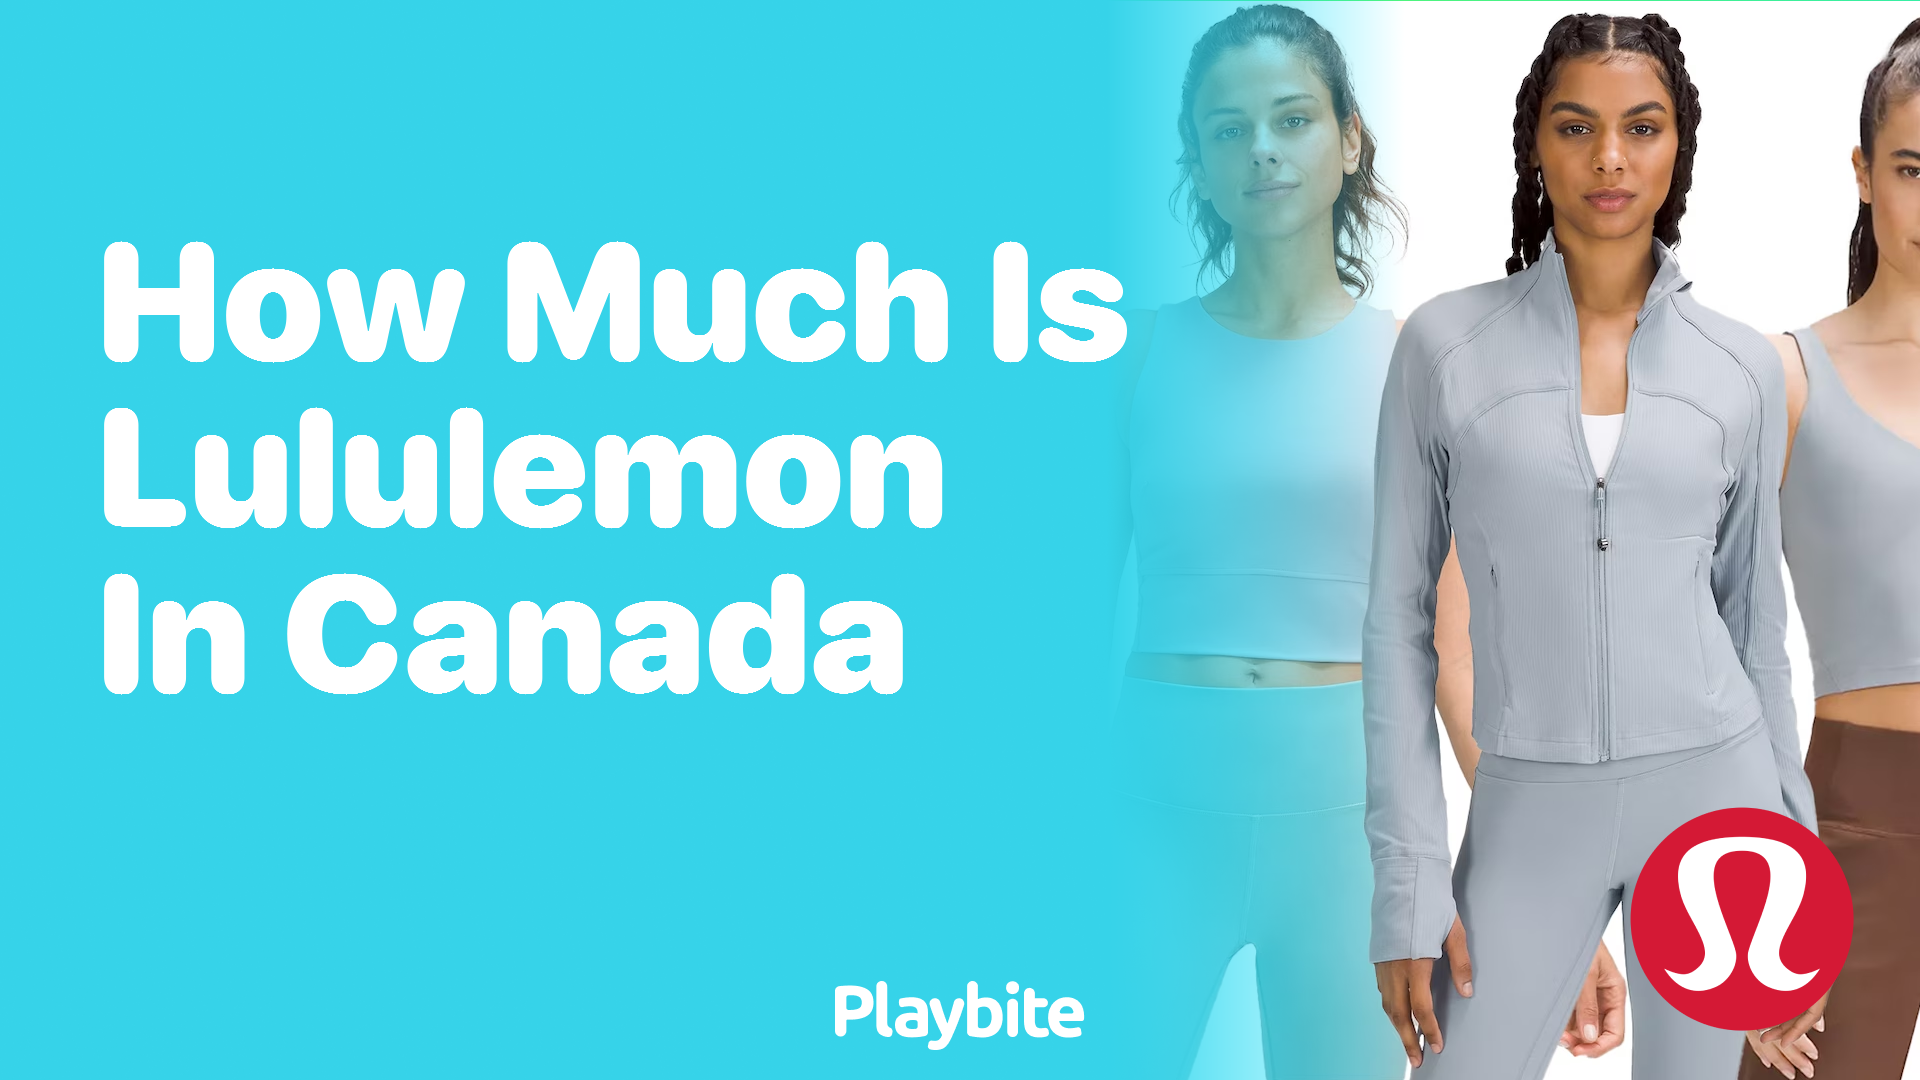 How Much Does Lululemon Cost in Canada? - Playbite